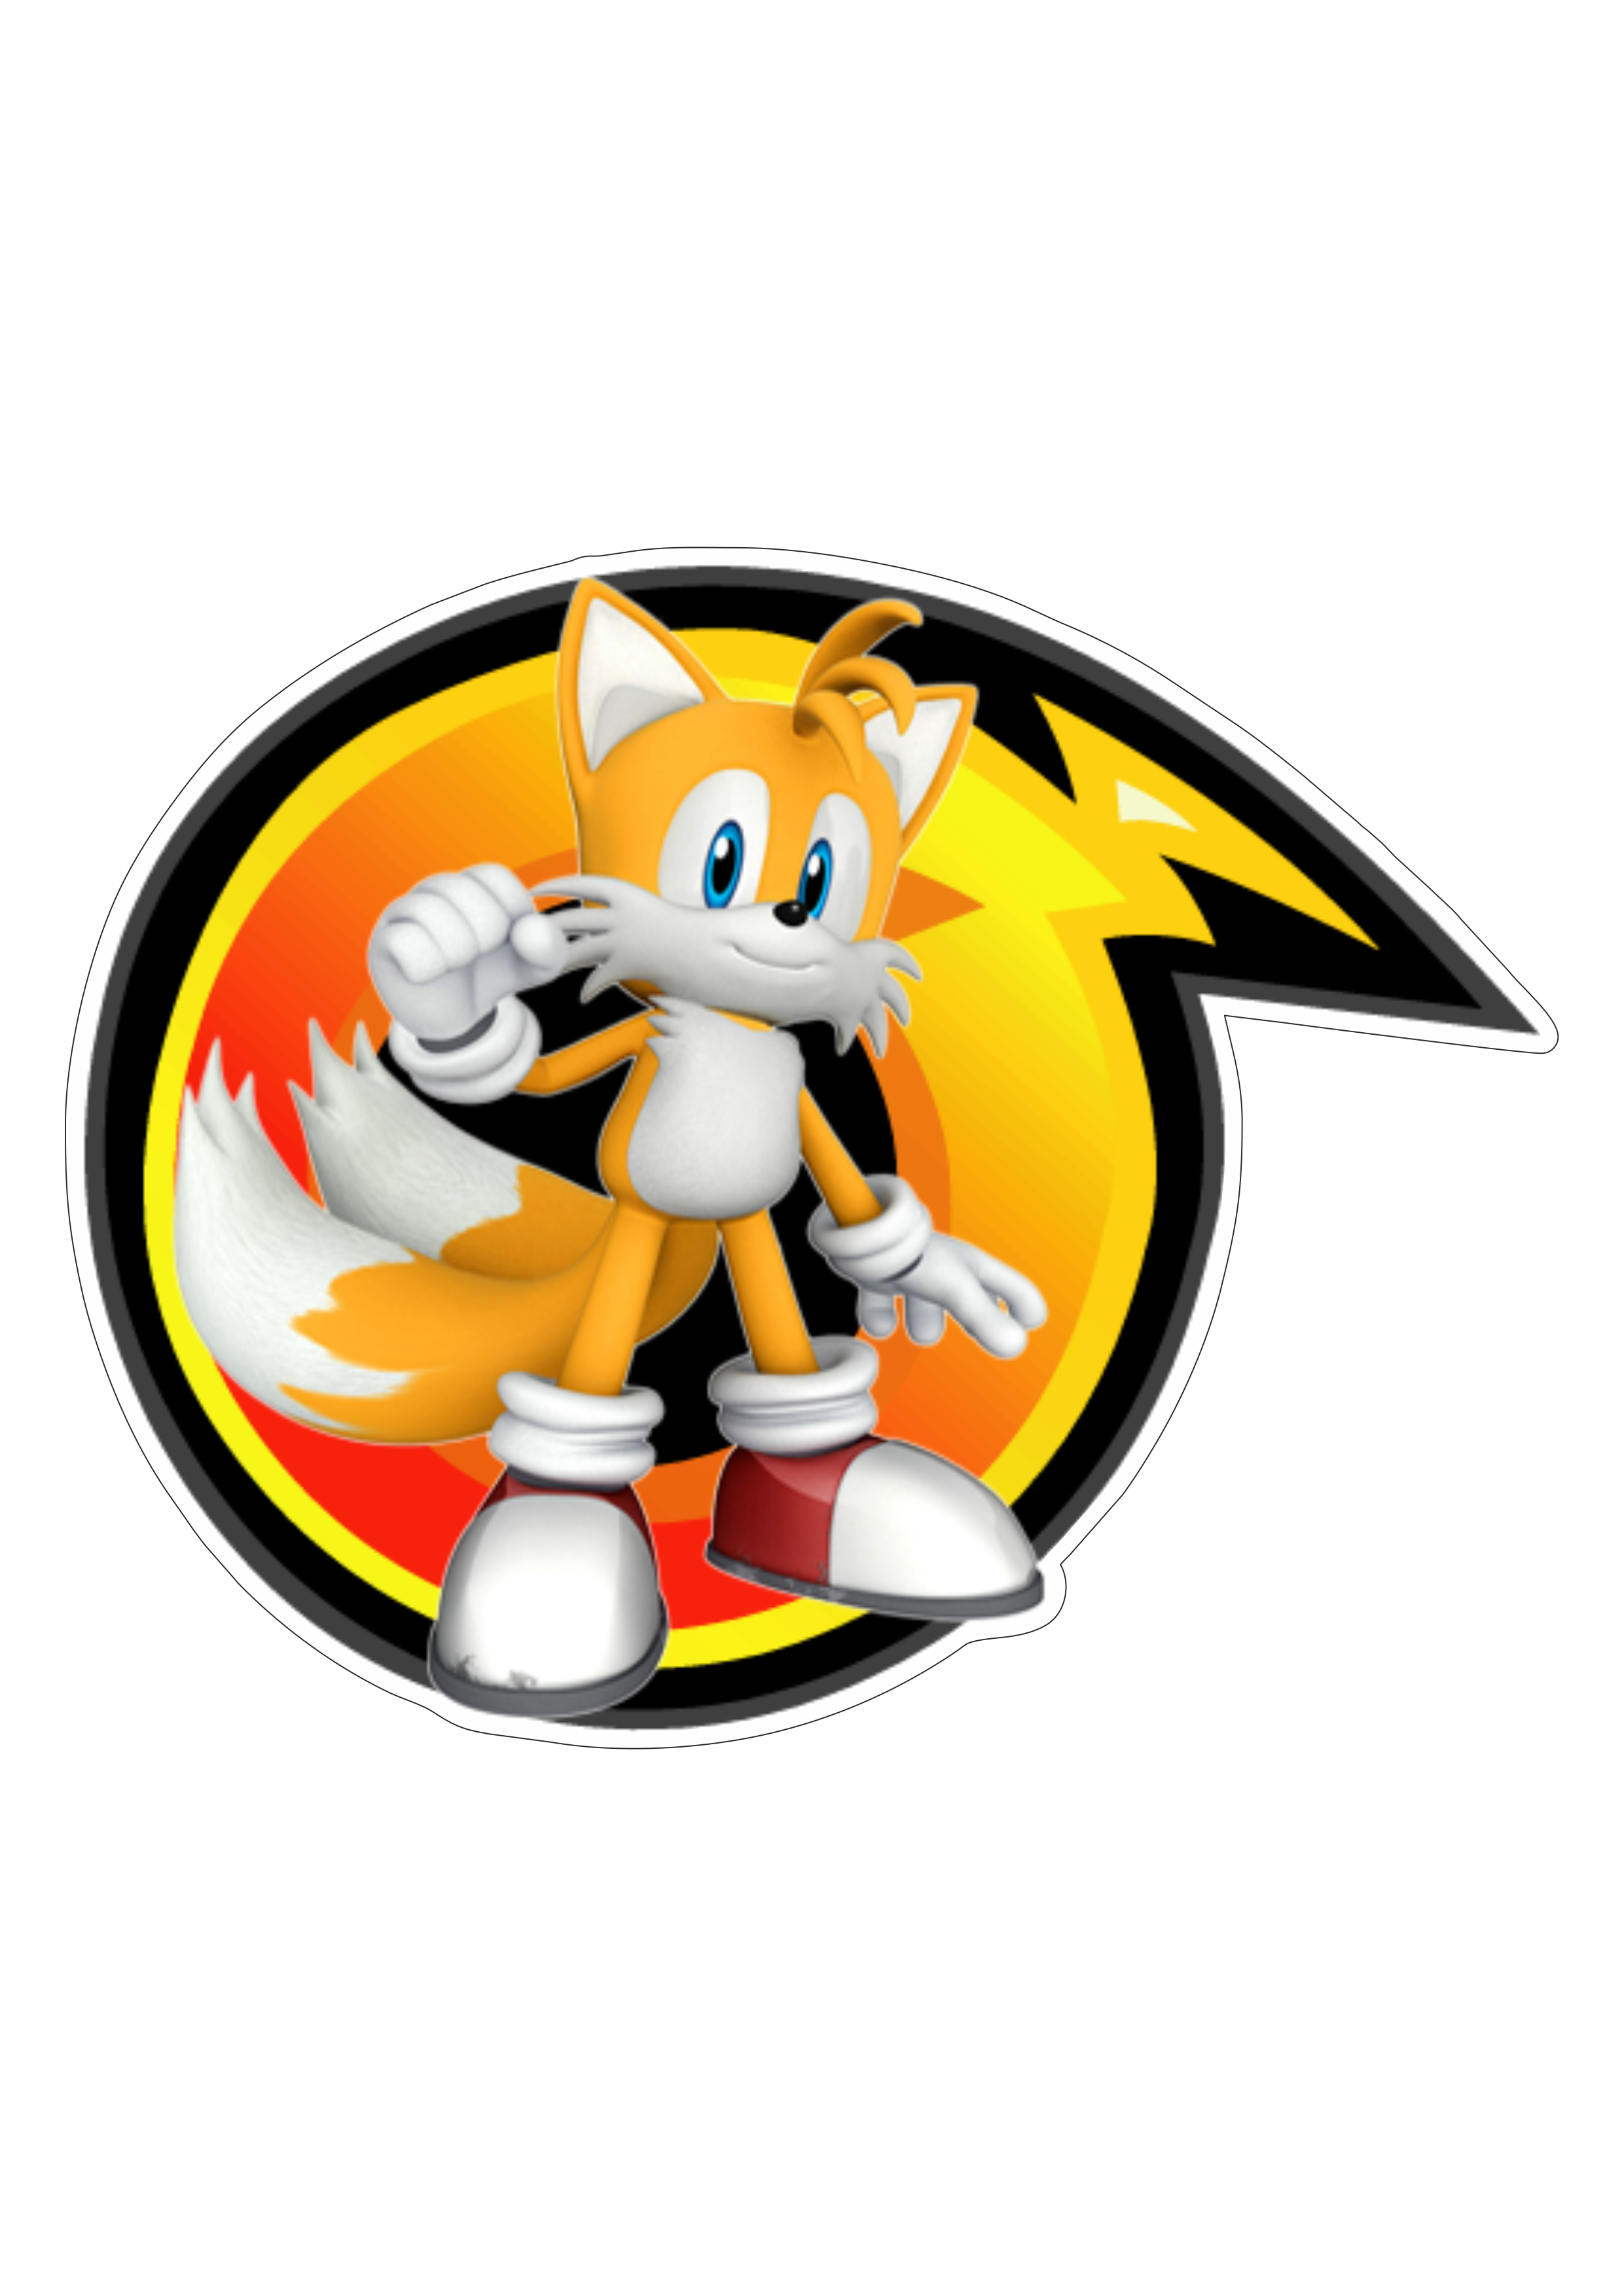 Sonic the hedgehog Tails logo png